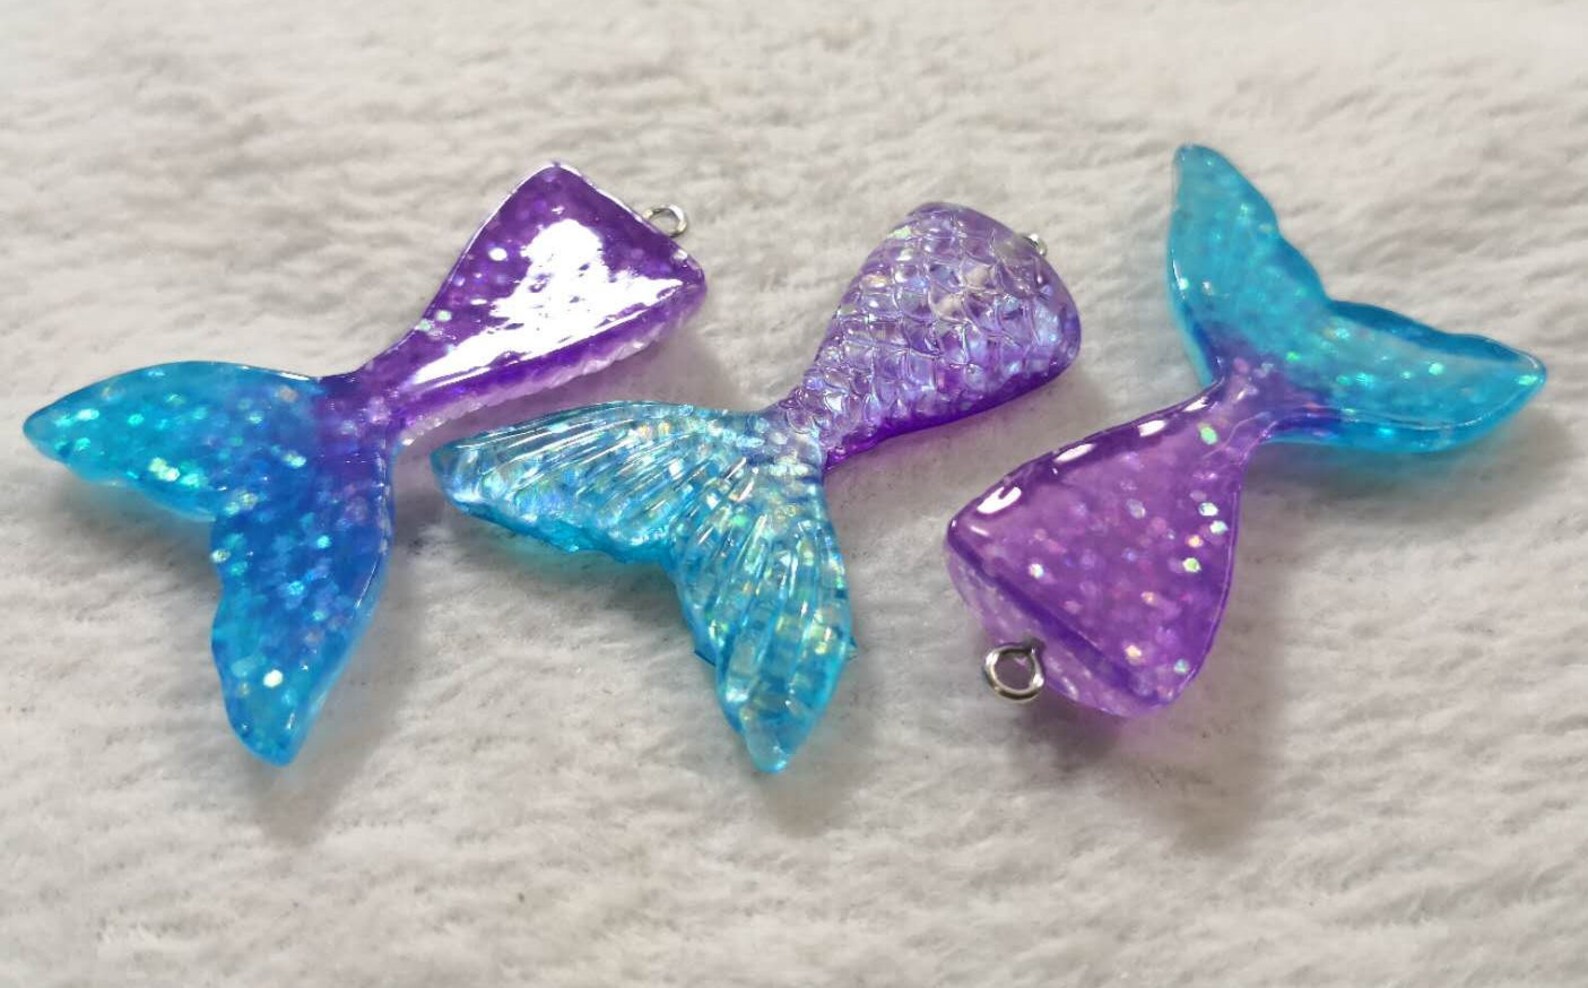 Mermaid Hair Accessories: Purple and Blue Hair Jewelry and Headbands - wide 2